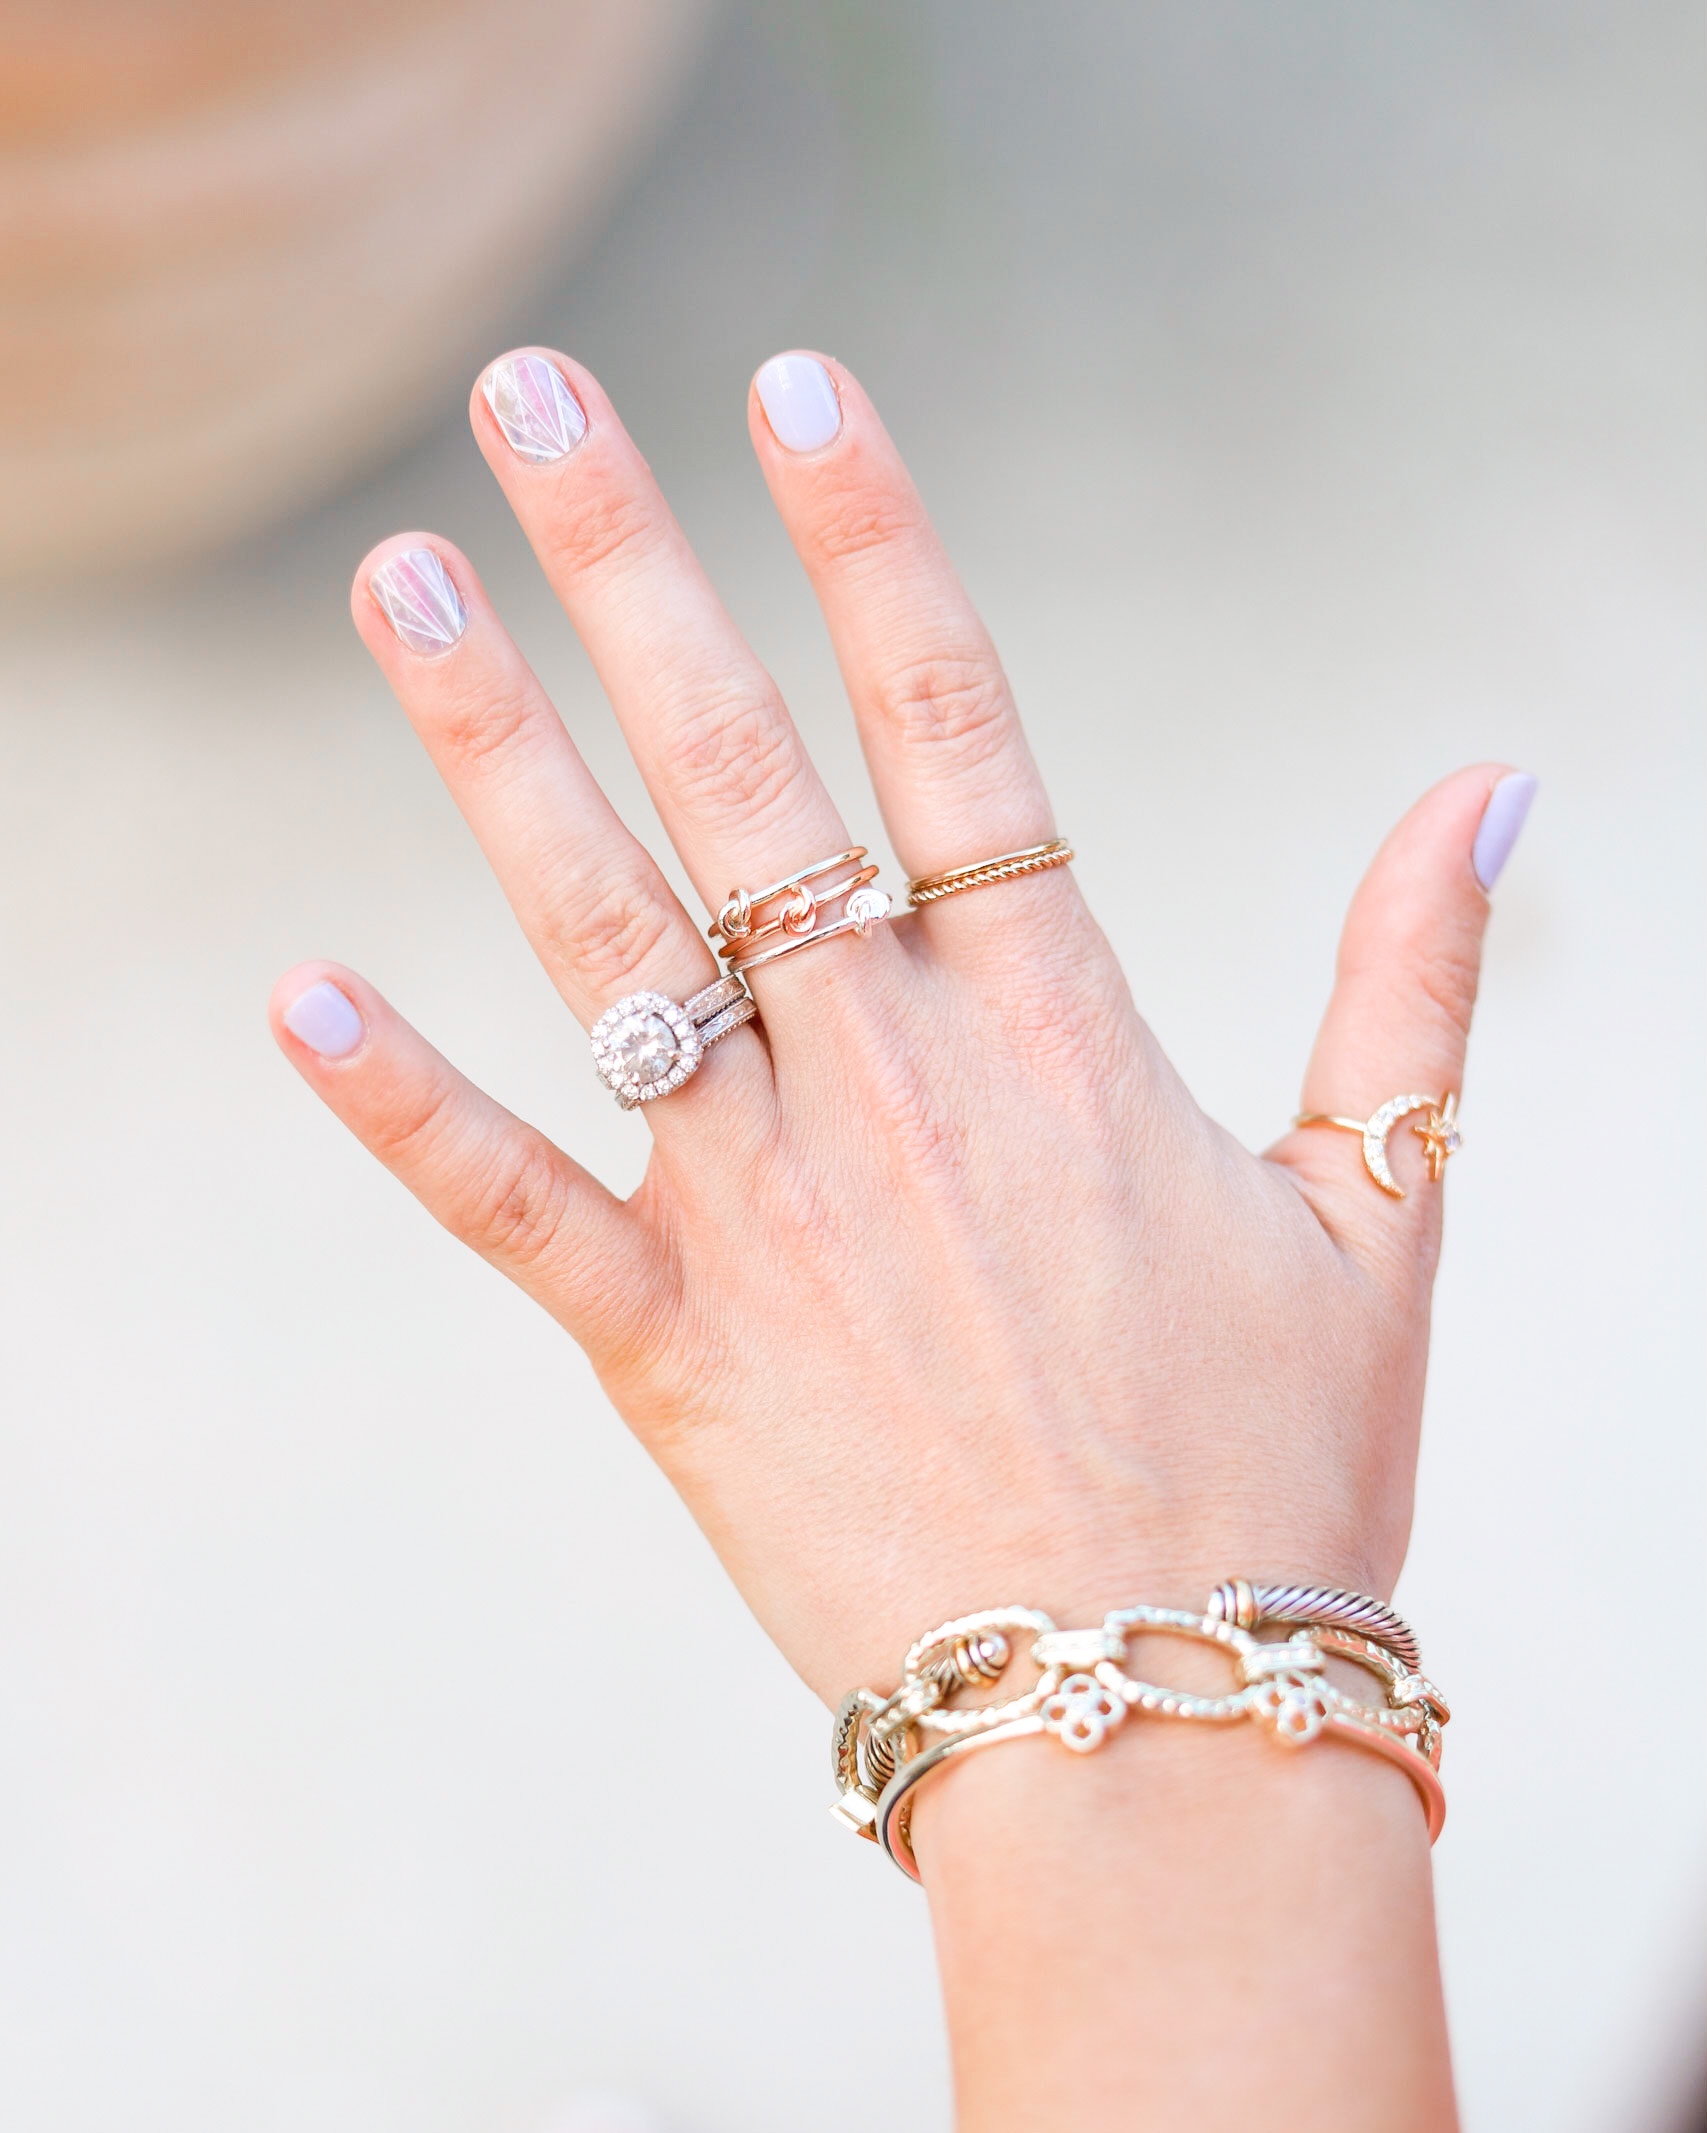 HOW TO LAYER JEWELRY RINGS